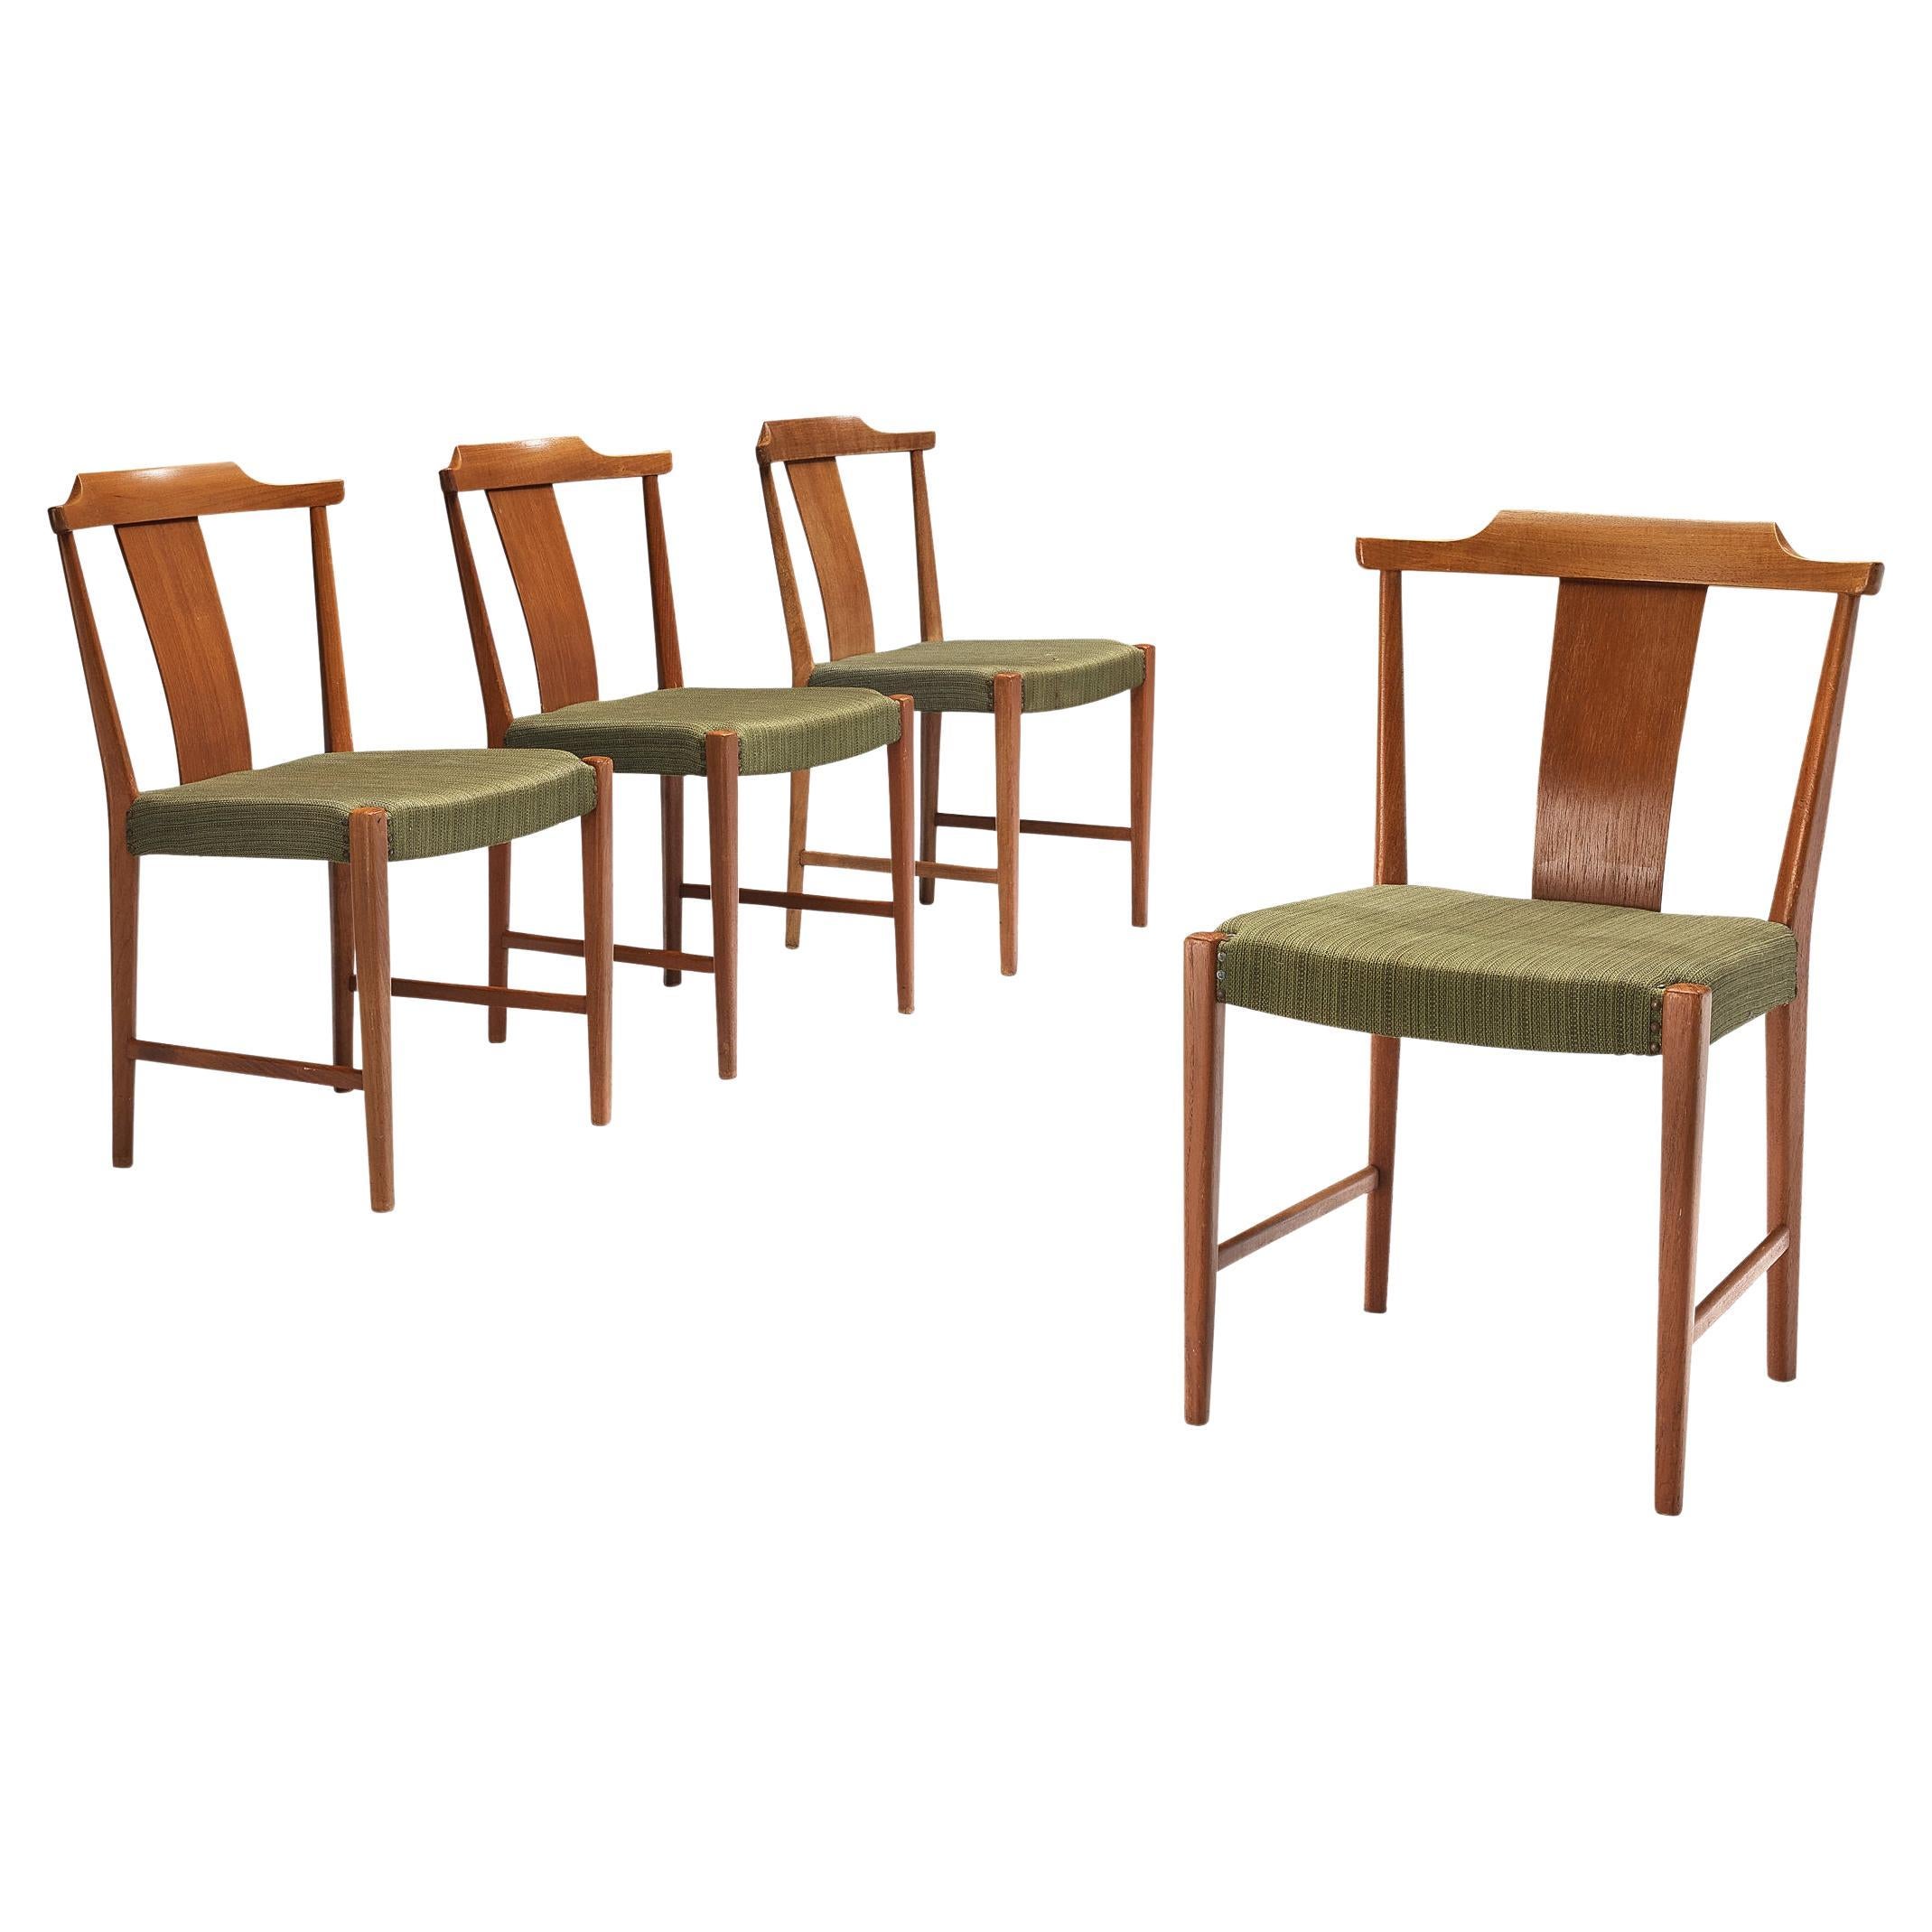 Swedish Chairs - 600 For Sale at 1stDibs | swedish chairs for sale 